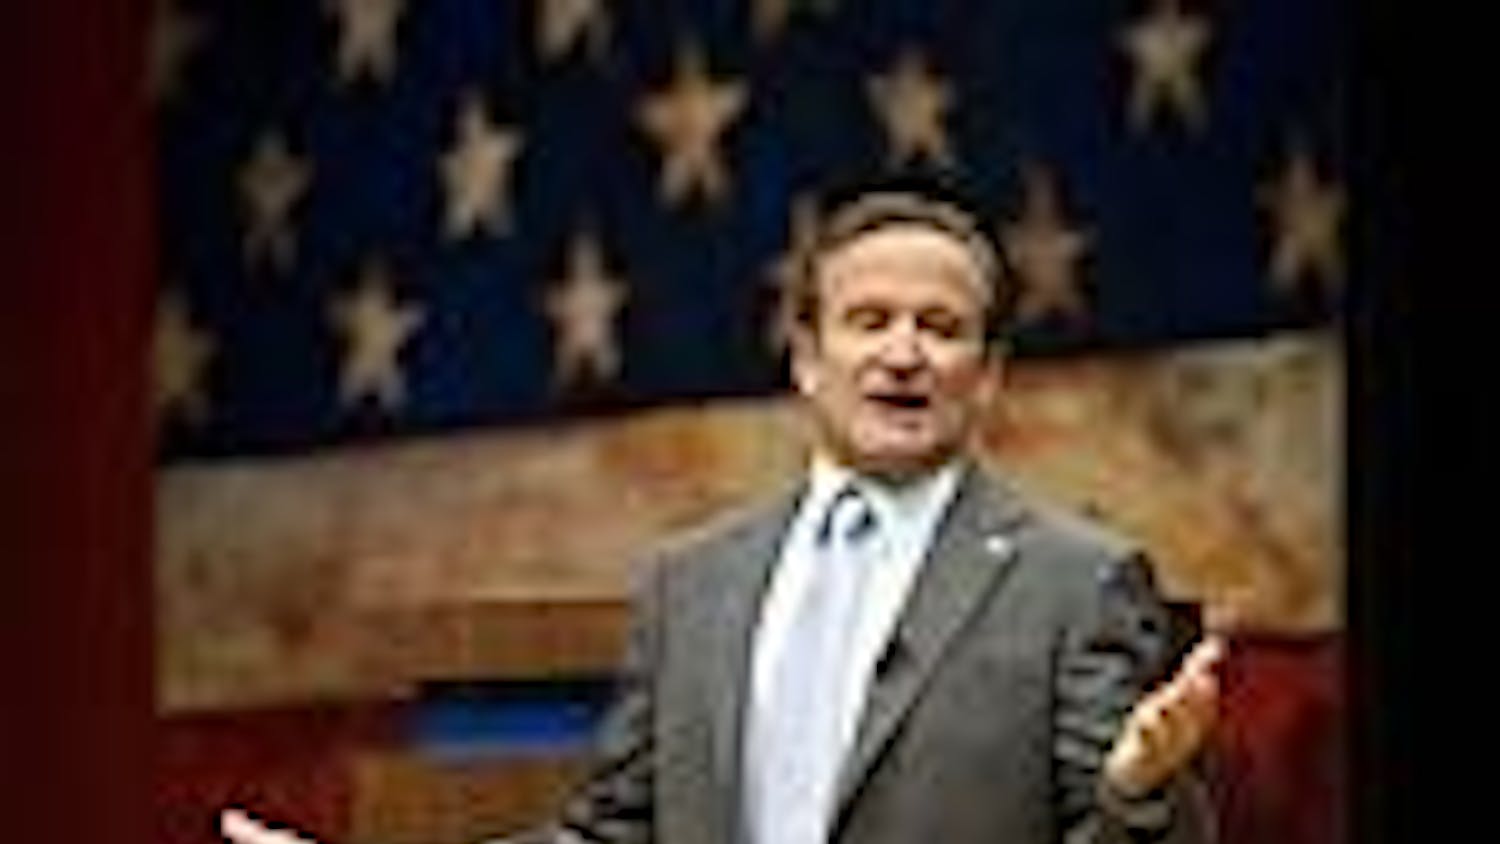 The comedic genius of Robin Williams turns political in new film.